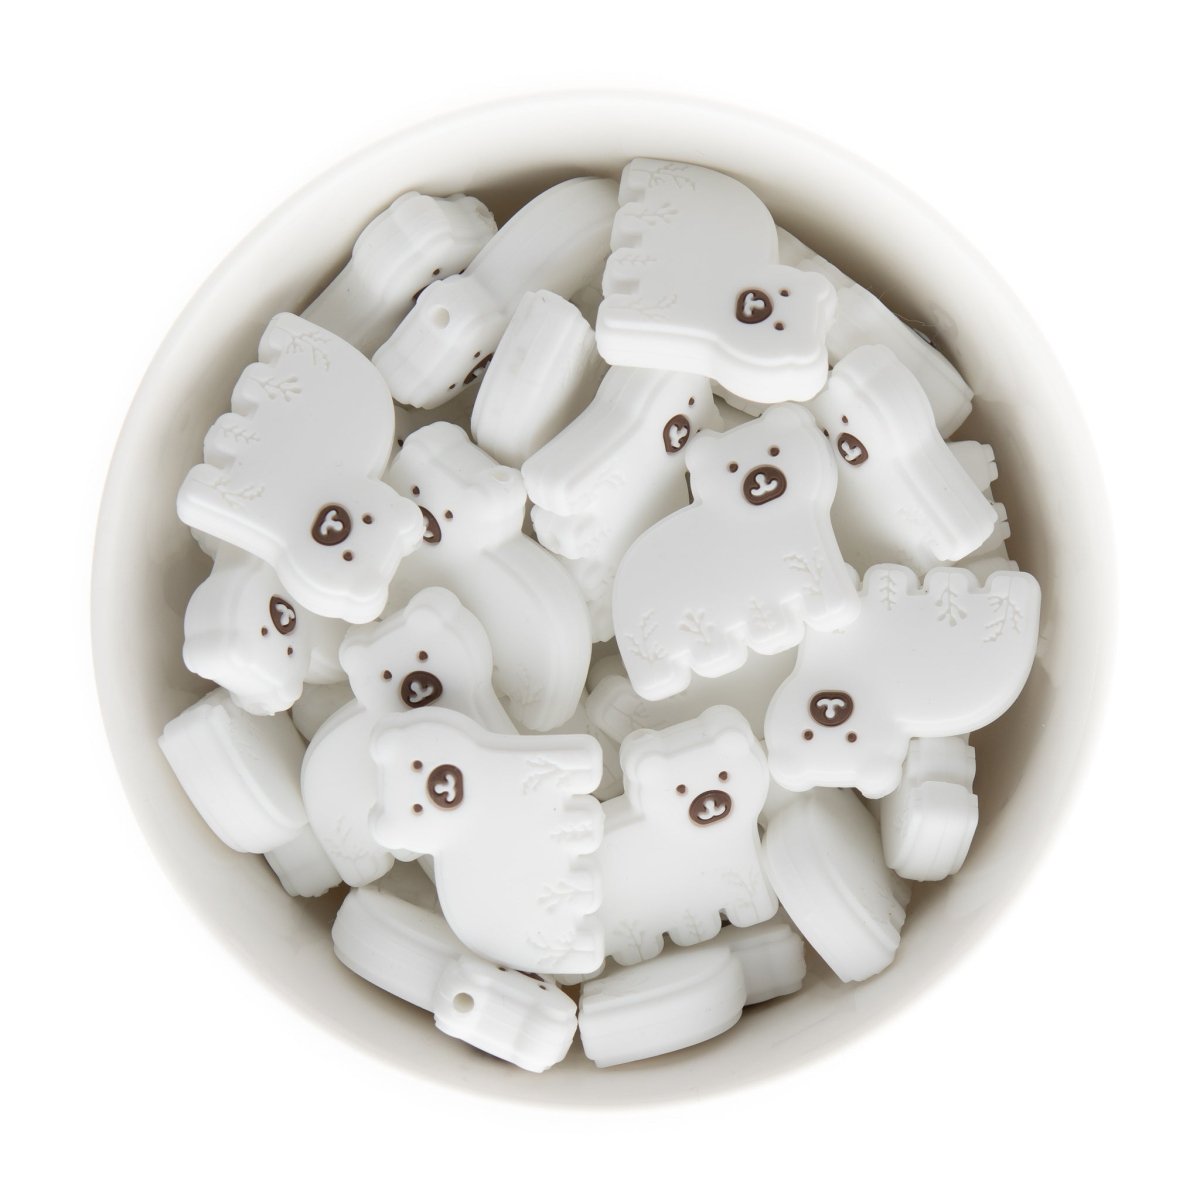 Silicone Focal Beads Baby Bears White from Cara & Co Craft Supply